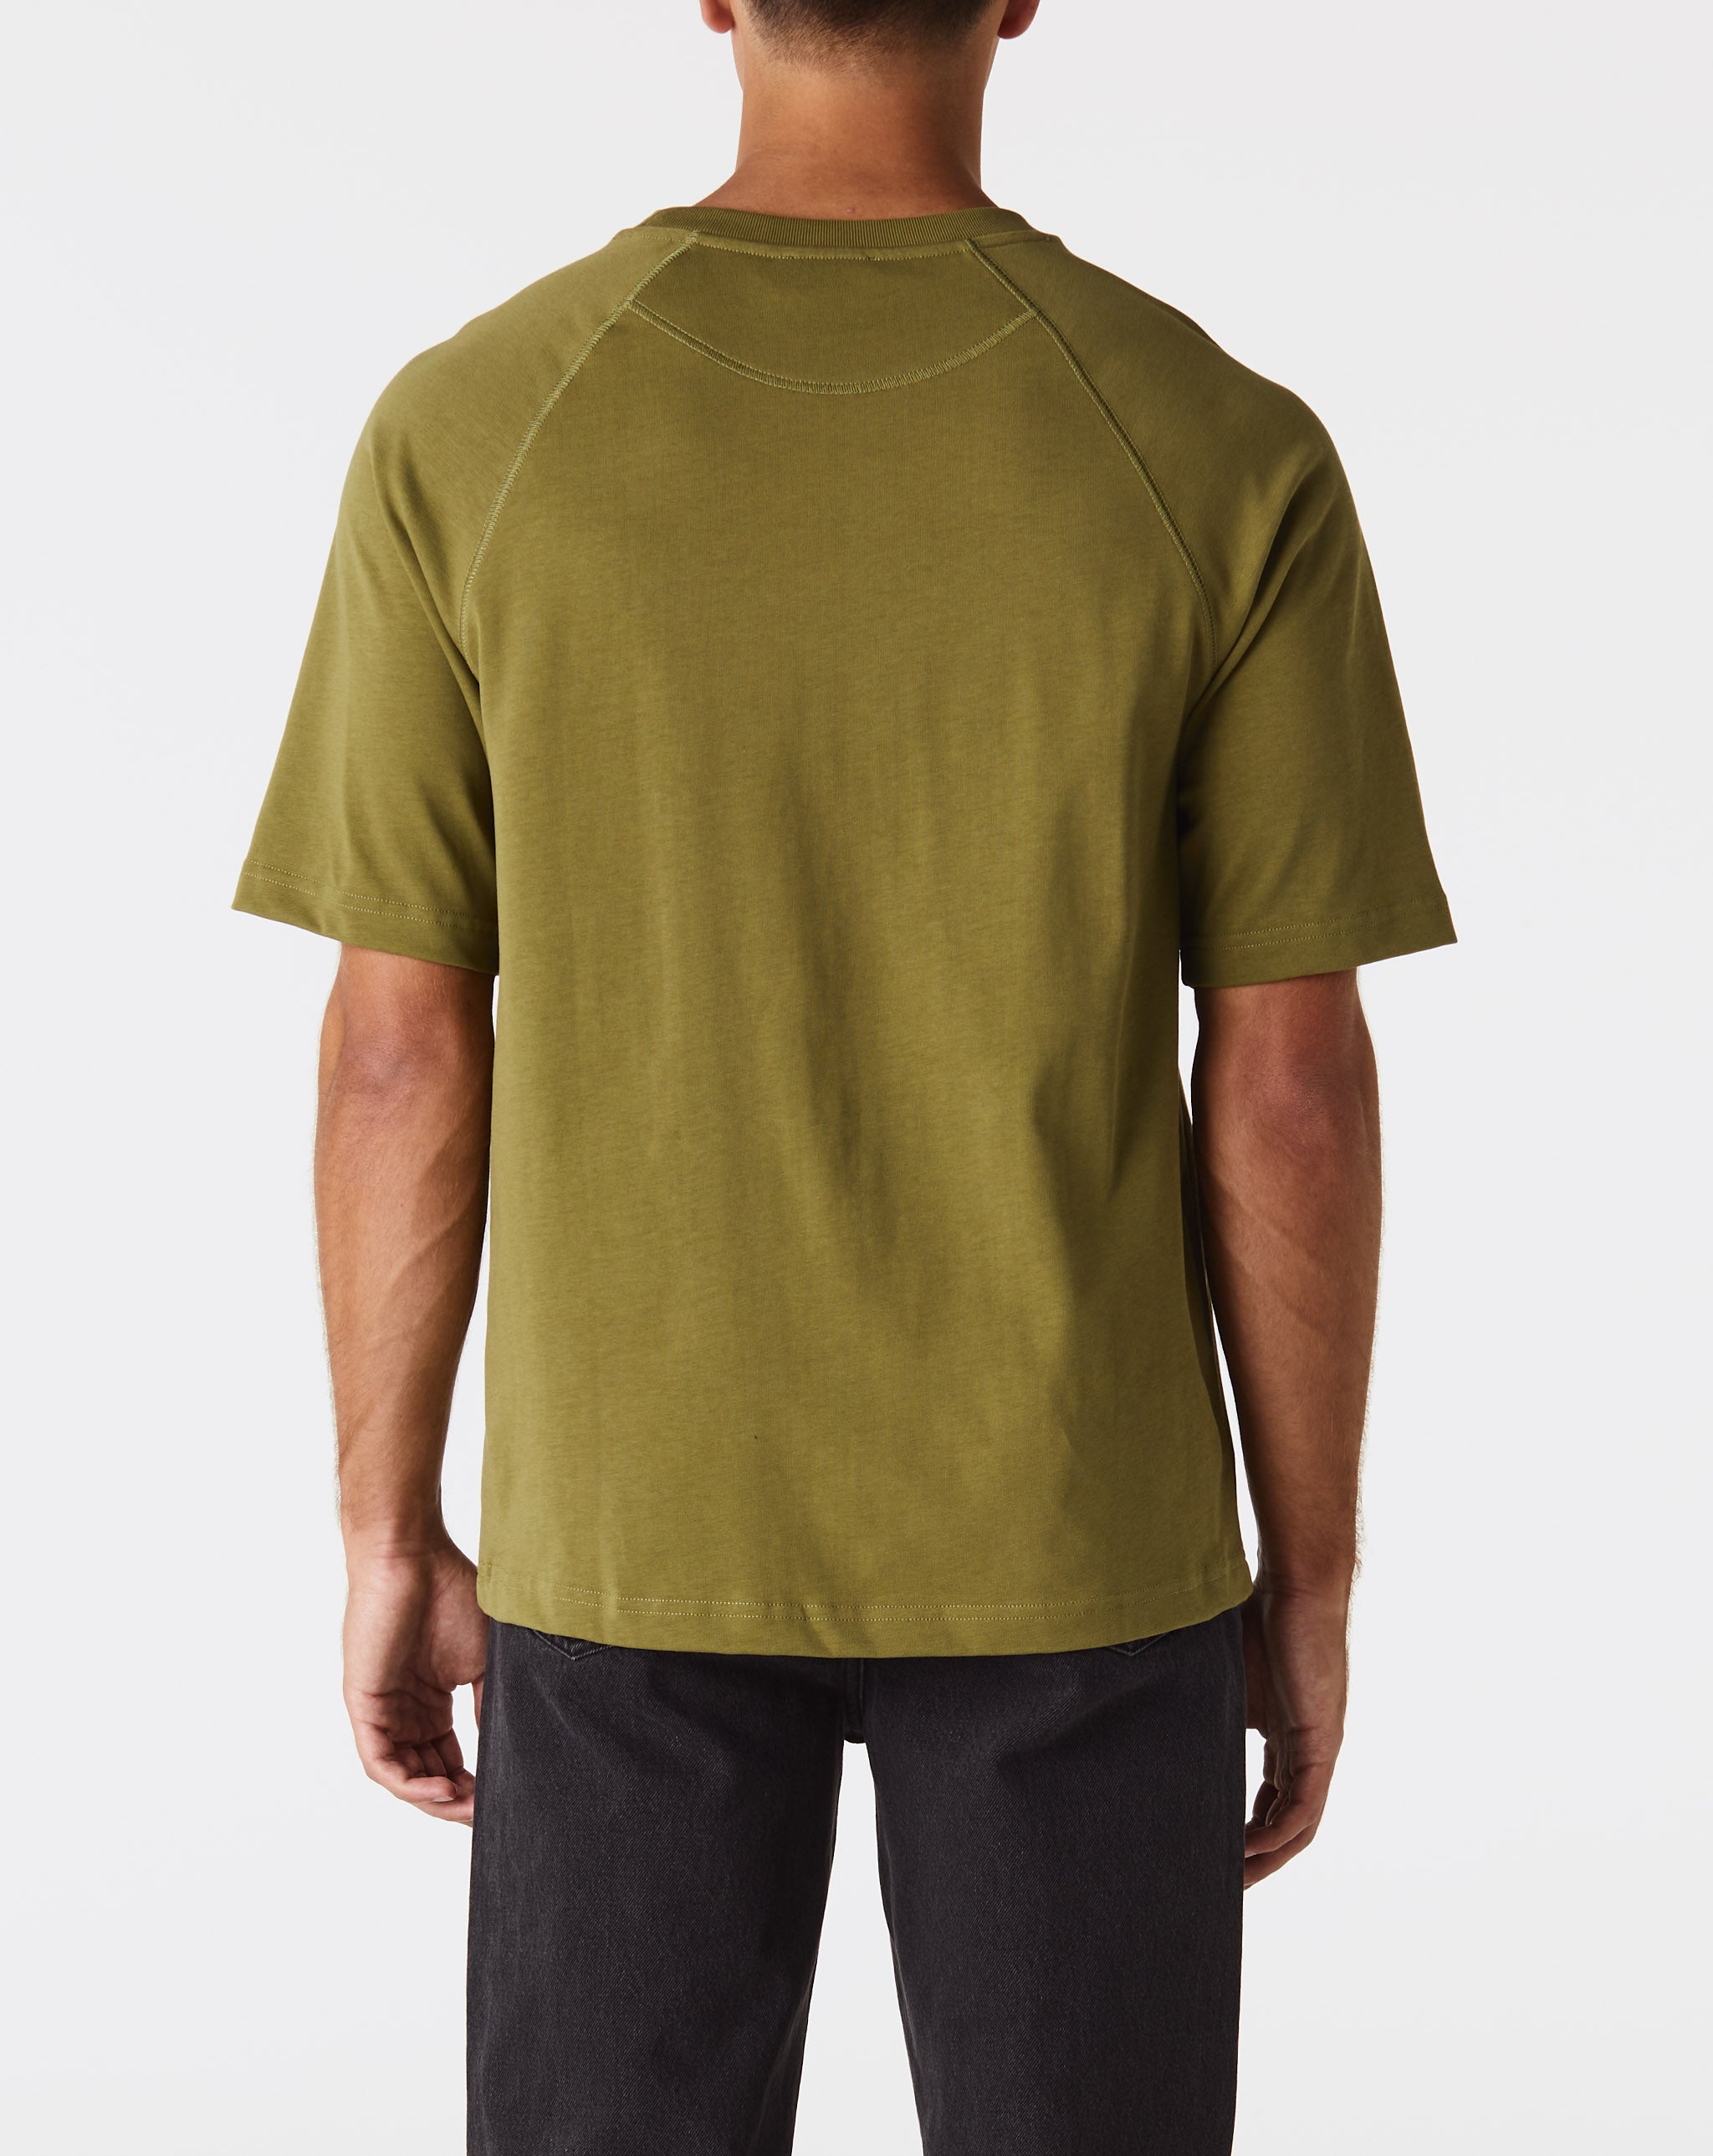 A.P.C. Willy T-Shirt  - XHIBITION